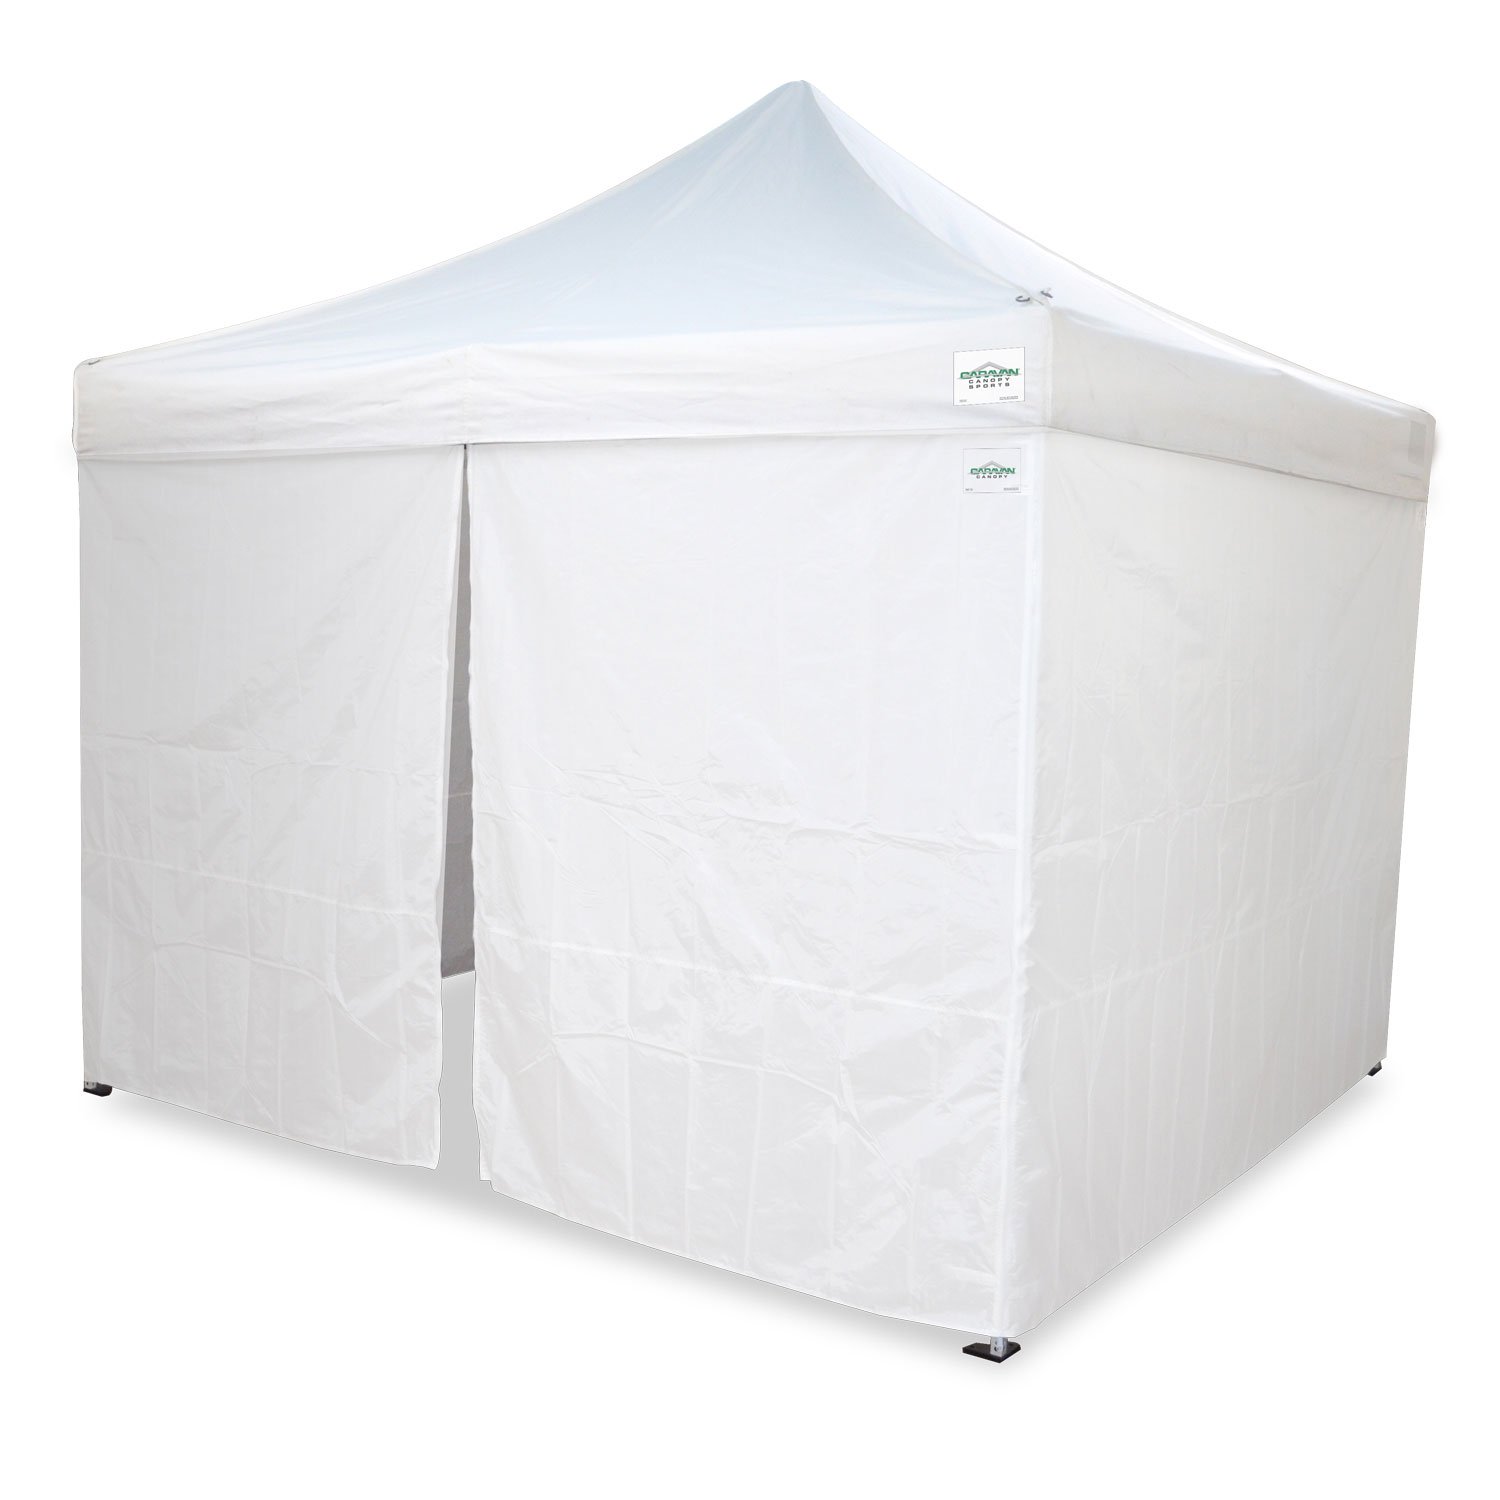 Caravan Canopy CVAN11007912014 4 Sidewall Kit Only, for Outdoor Tent, White - image 2 of 5